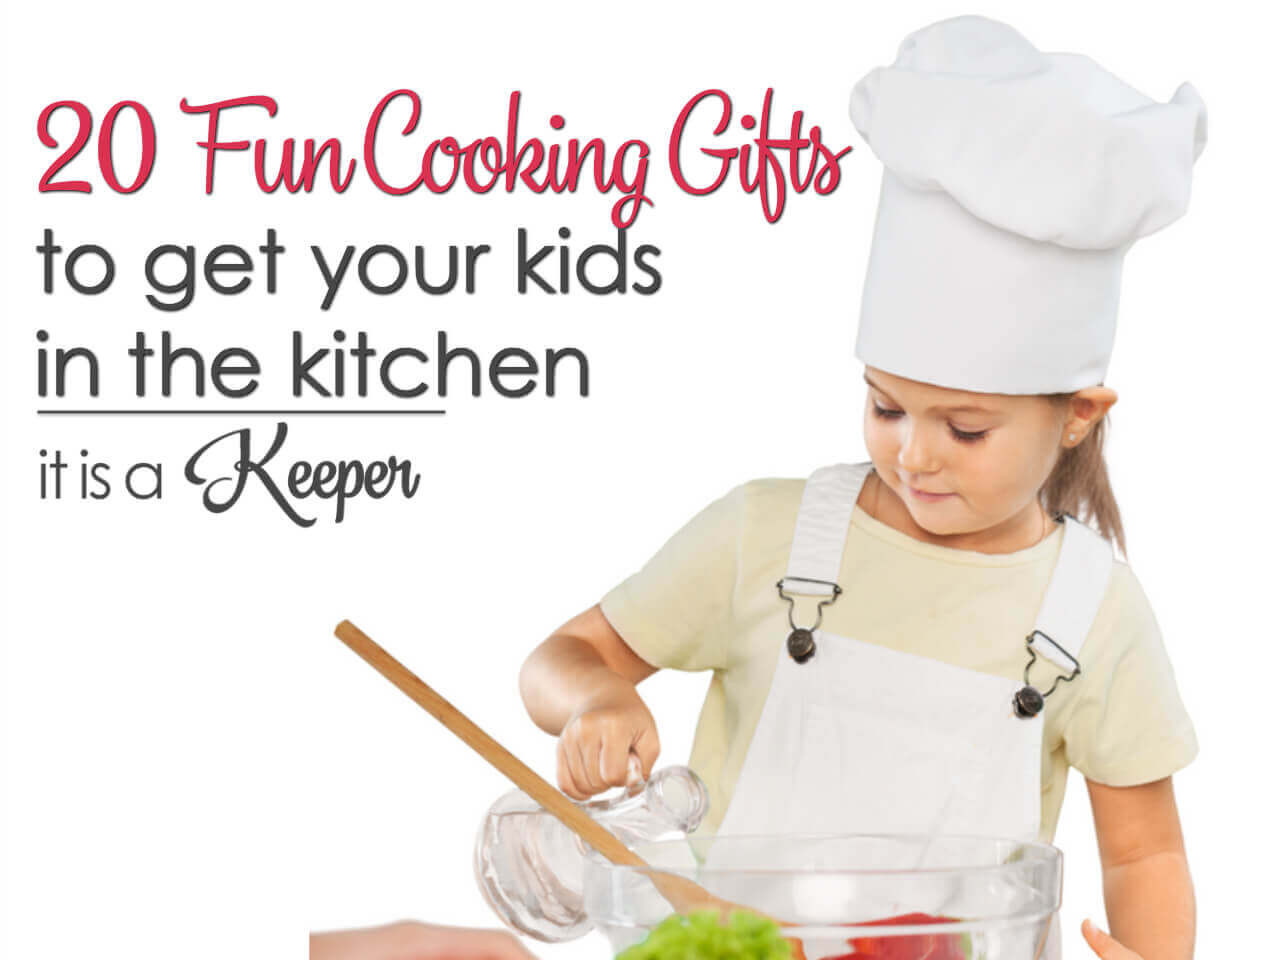 Kids Cooking Gift Ideas
 Fun Cooking Gift Ideas for Kids